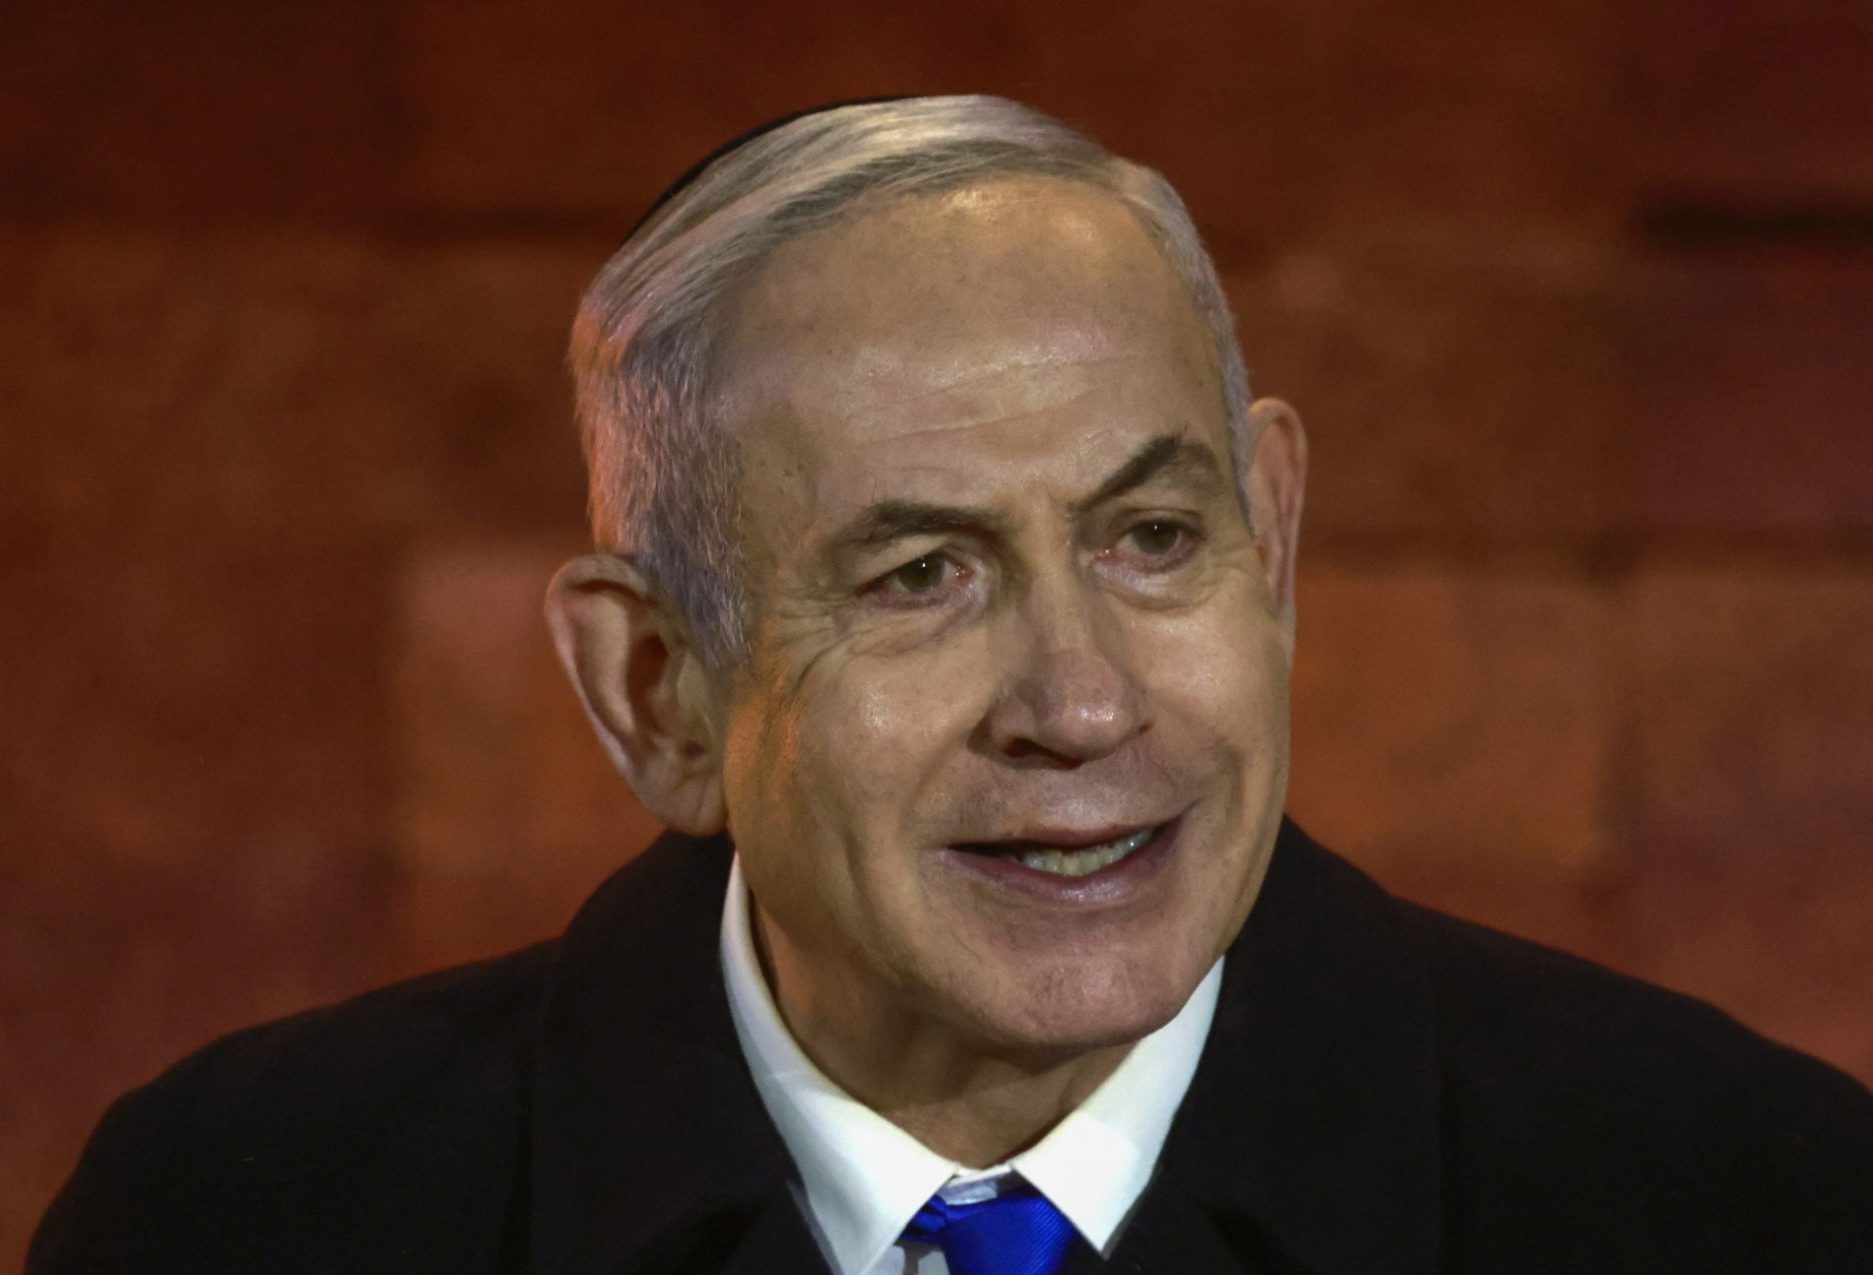 Netanyahu Opens Up About Israel's Missteps in Dr. Phil Conversation